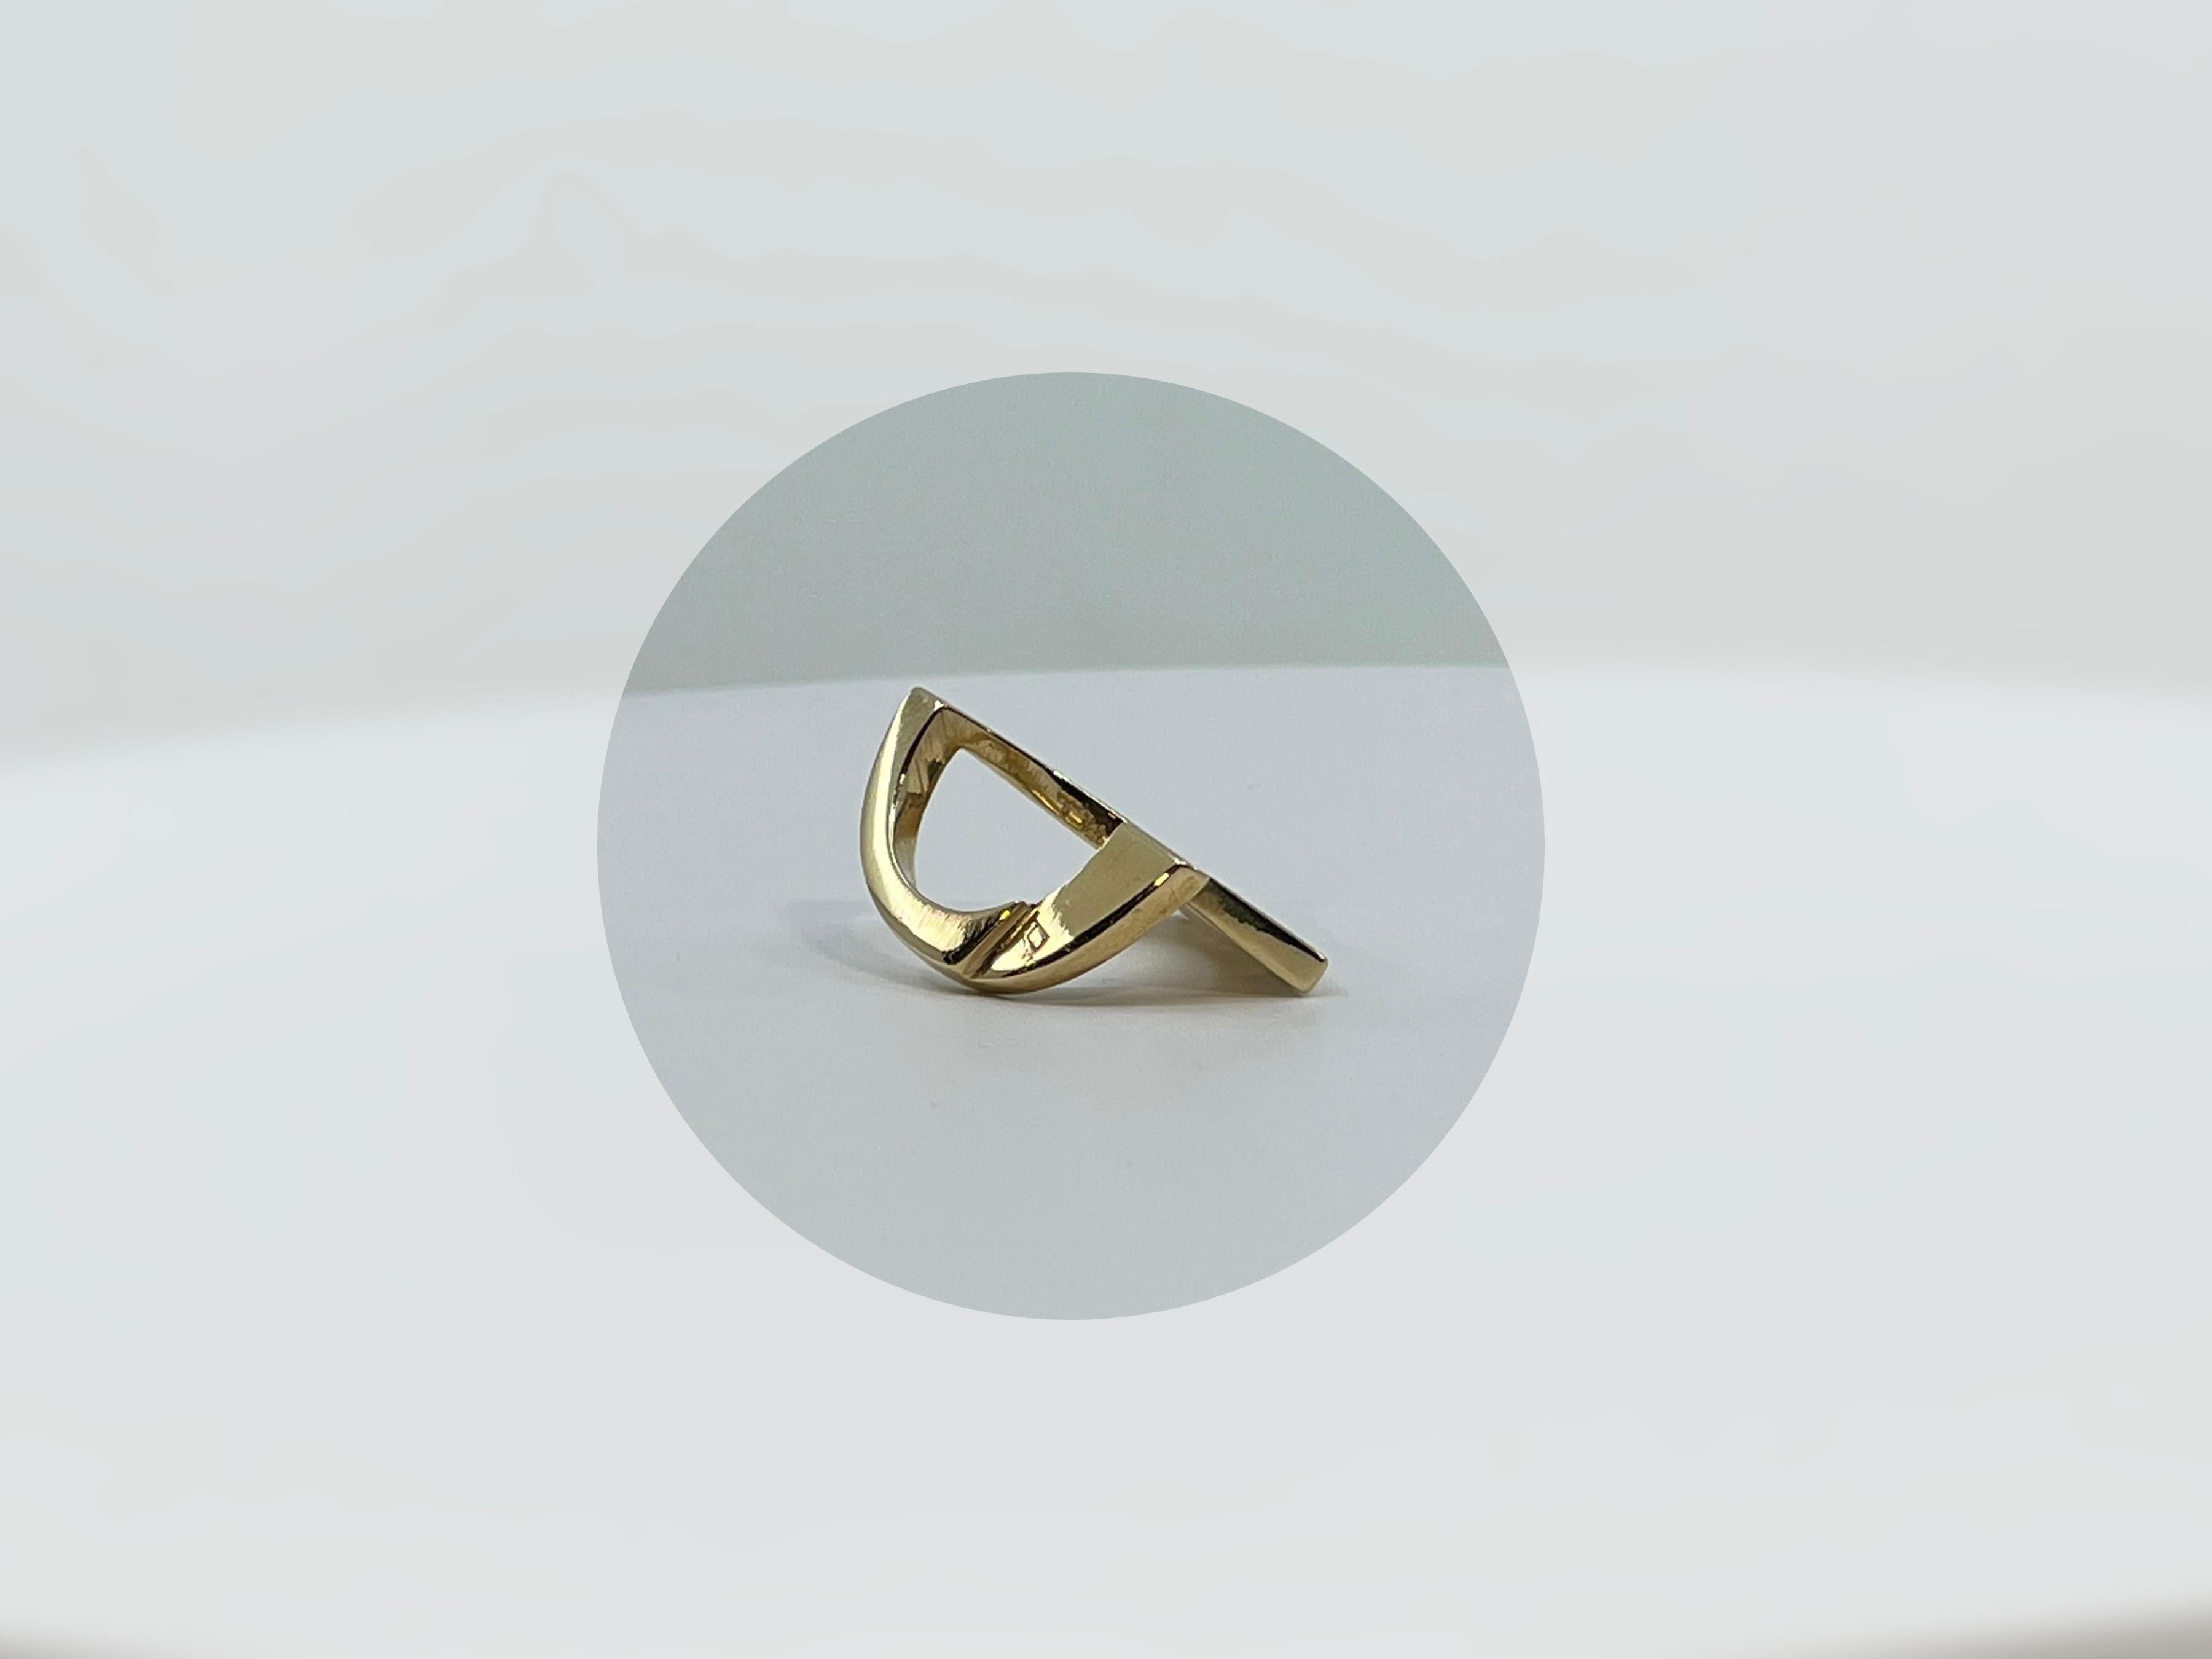 This ring is one of the Sculptural / Architectural jewellery pieces created by Argentinian/Canadian artist Dina González Mascaró. This ring is part of the explorations that the artist did, calling the series: 